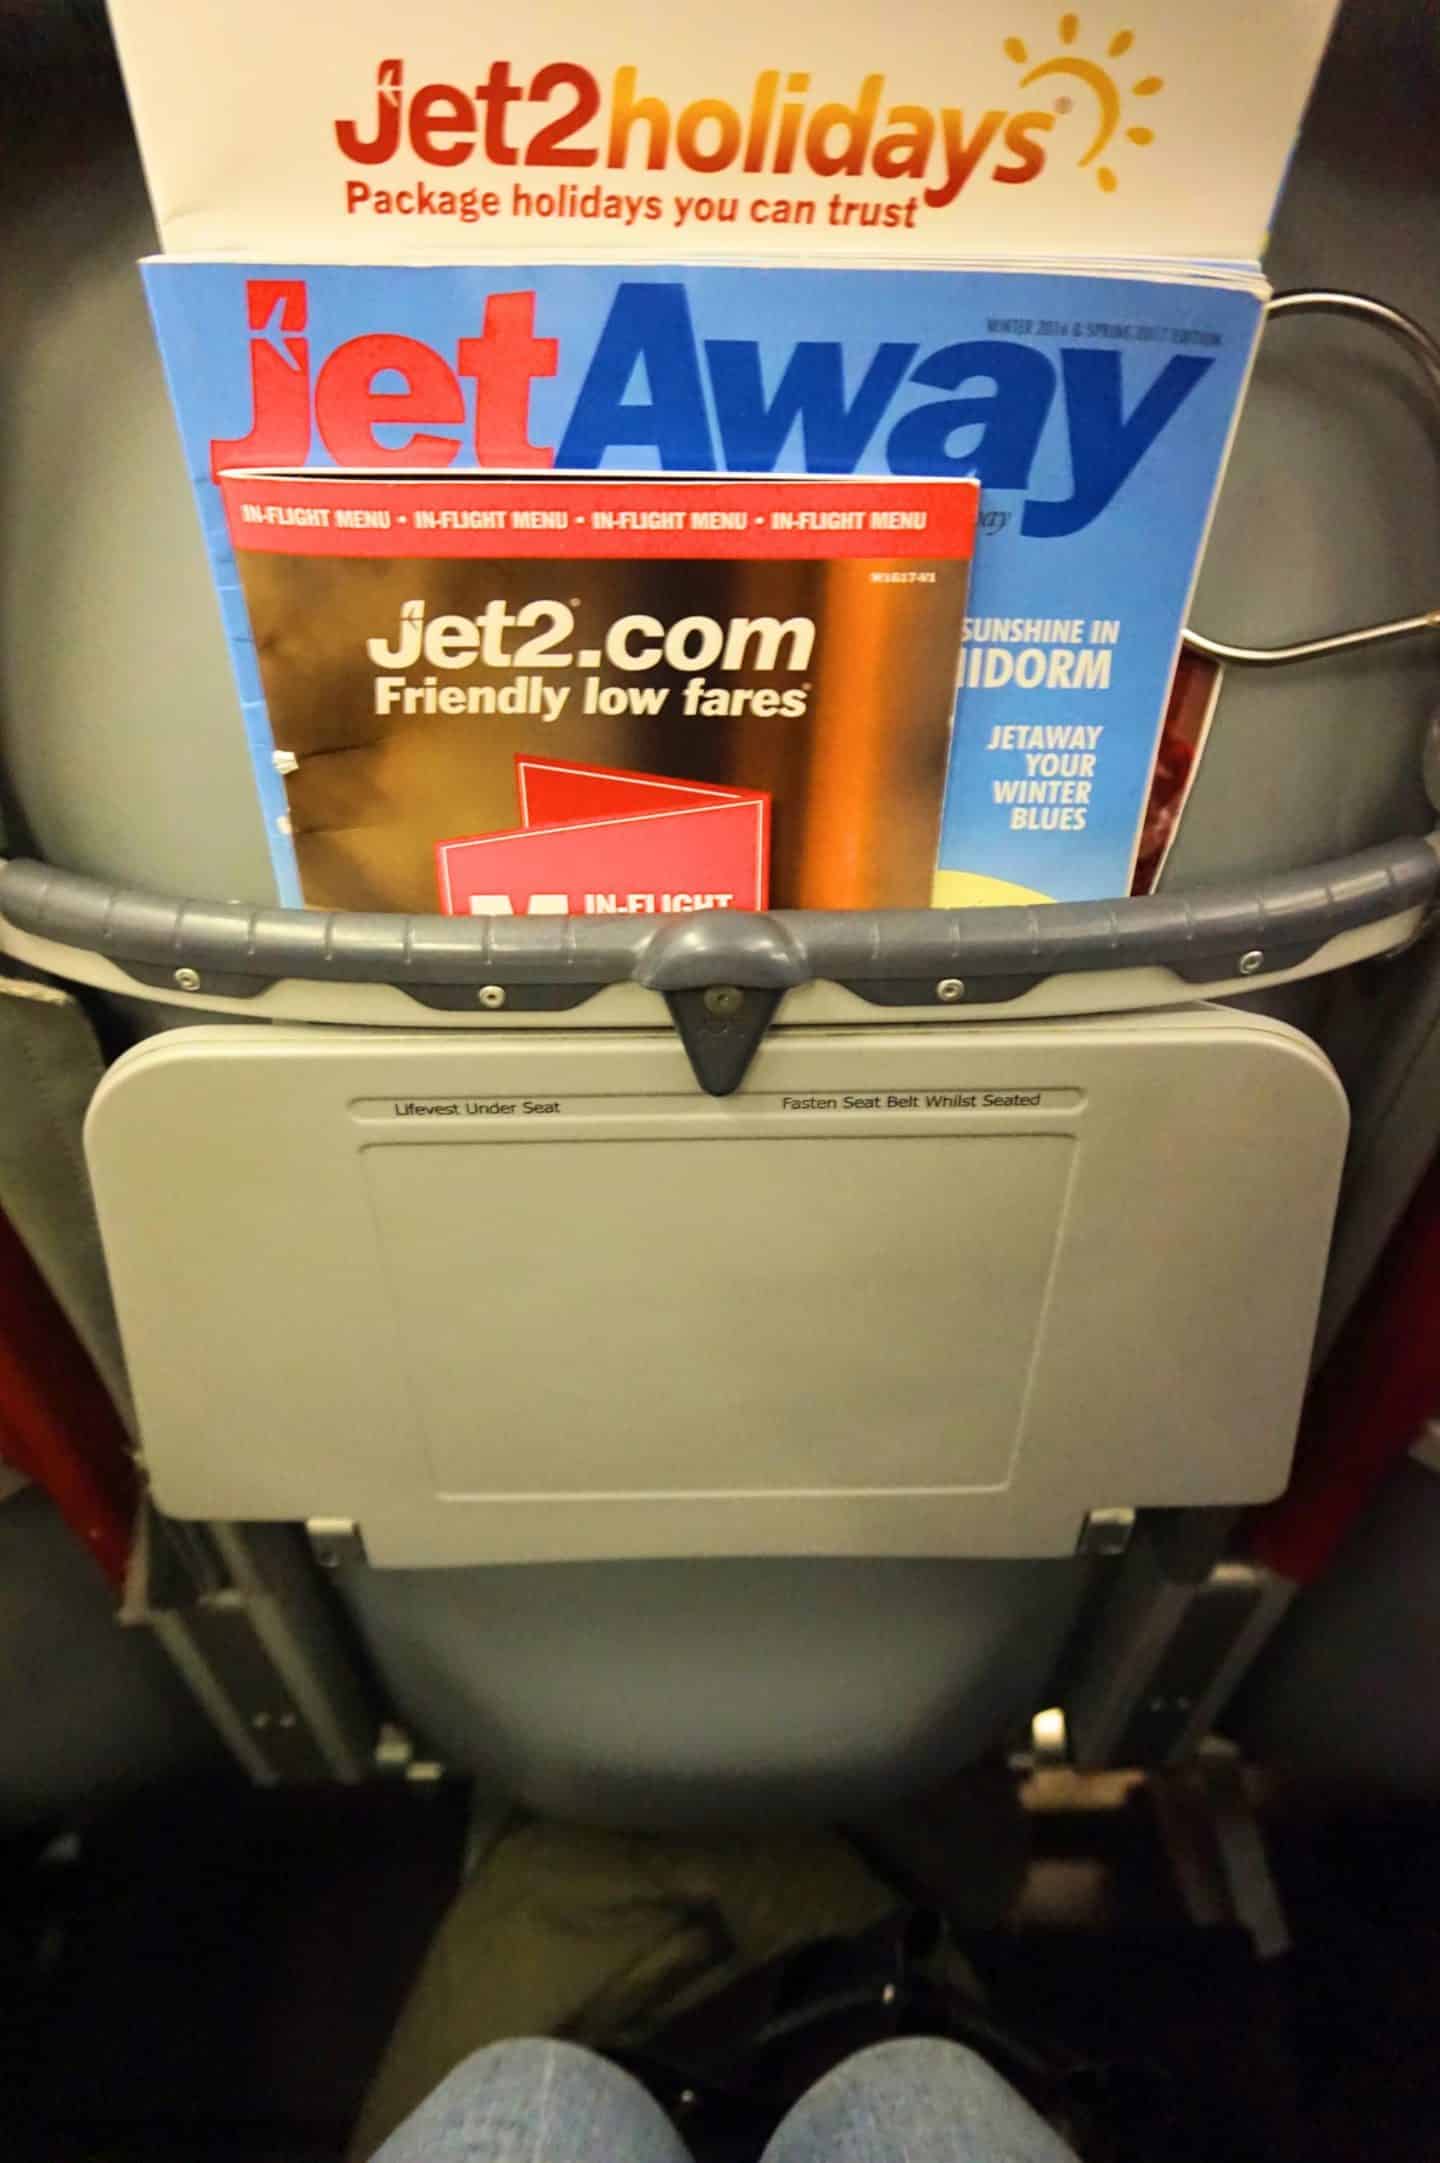 Jet2 Review